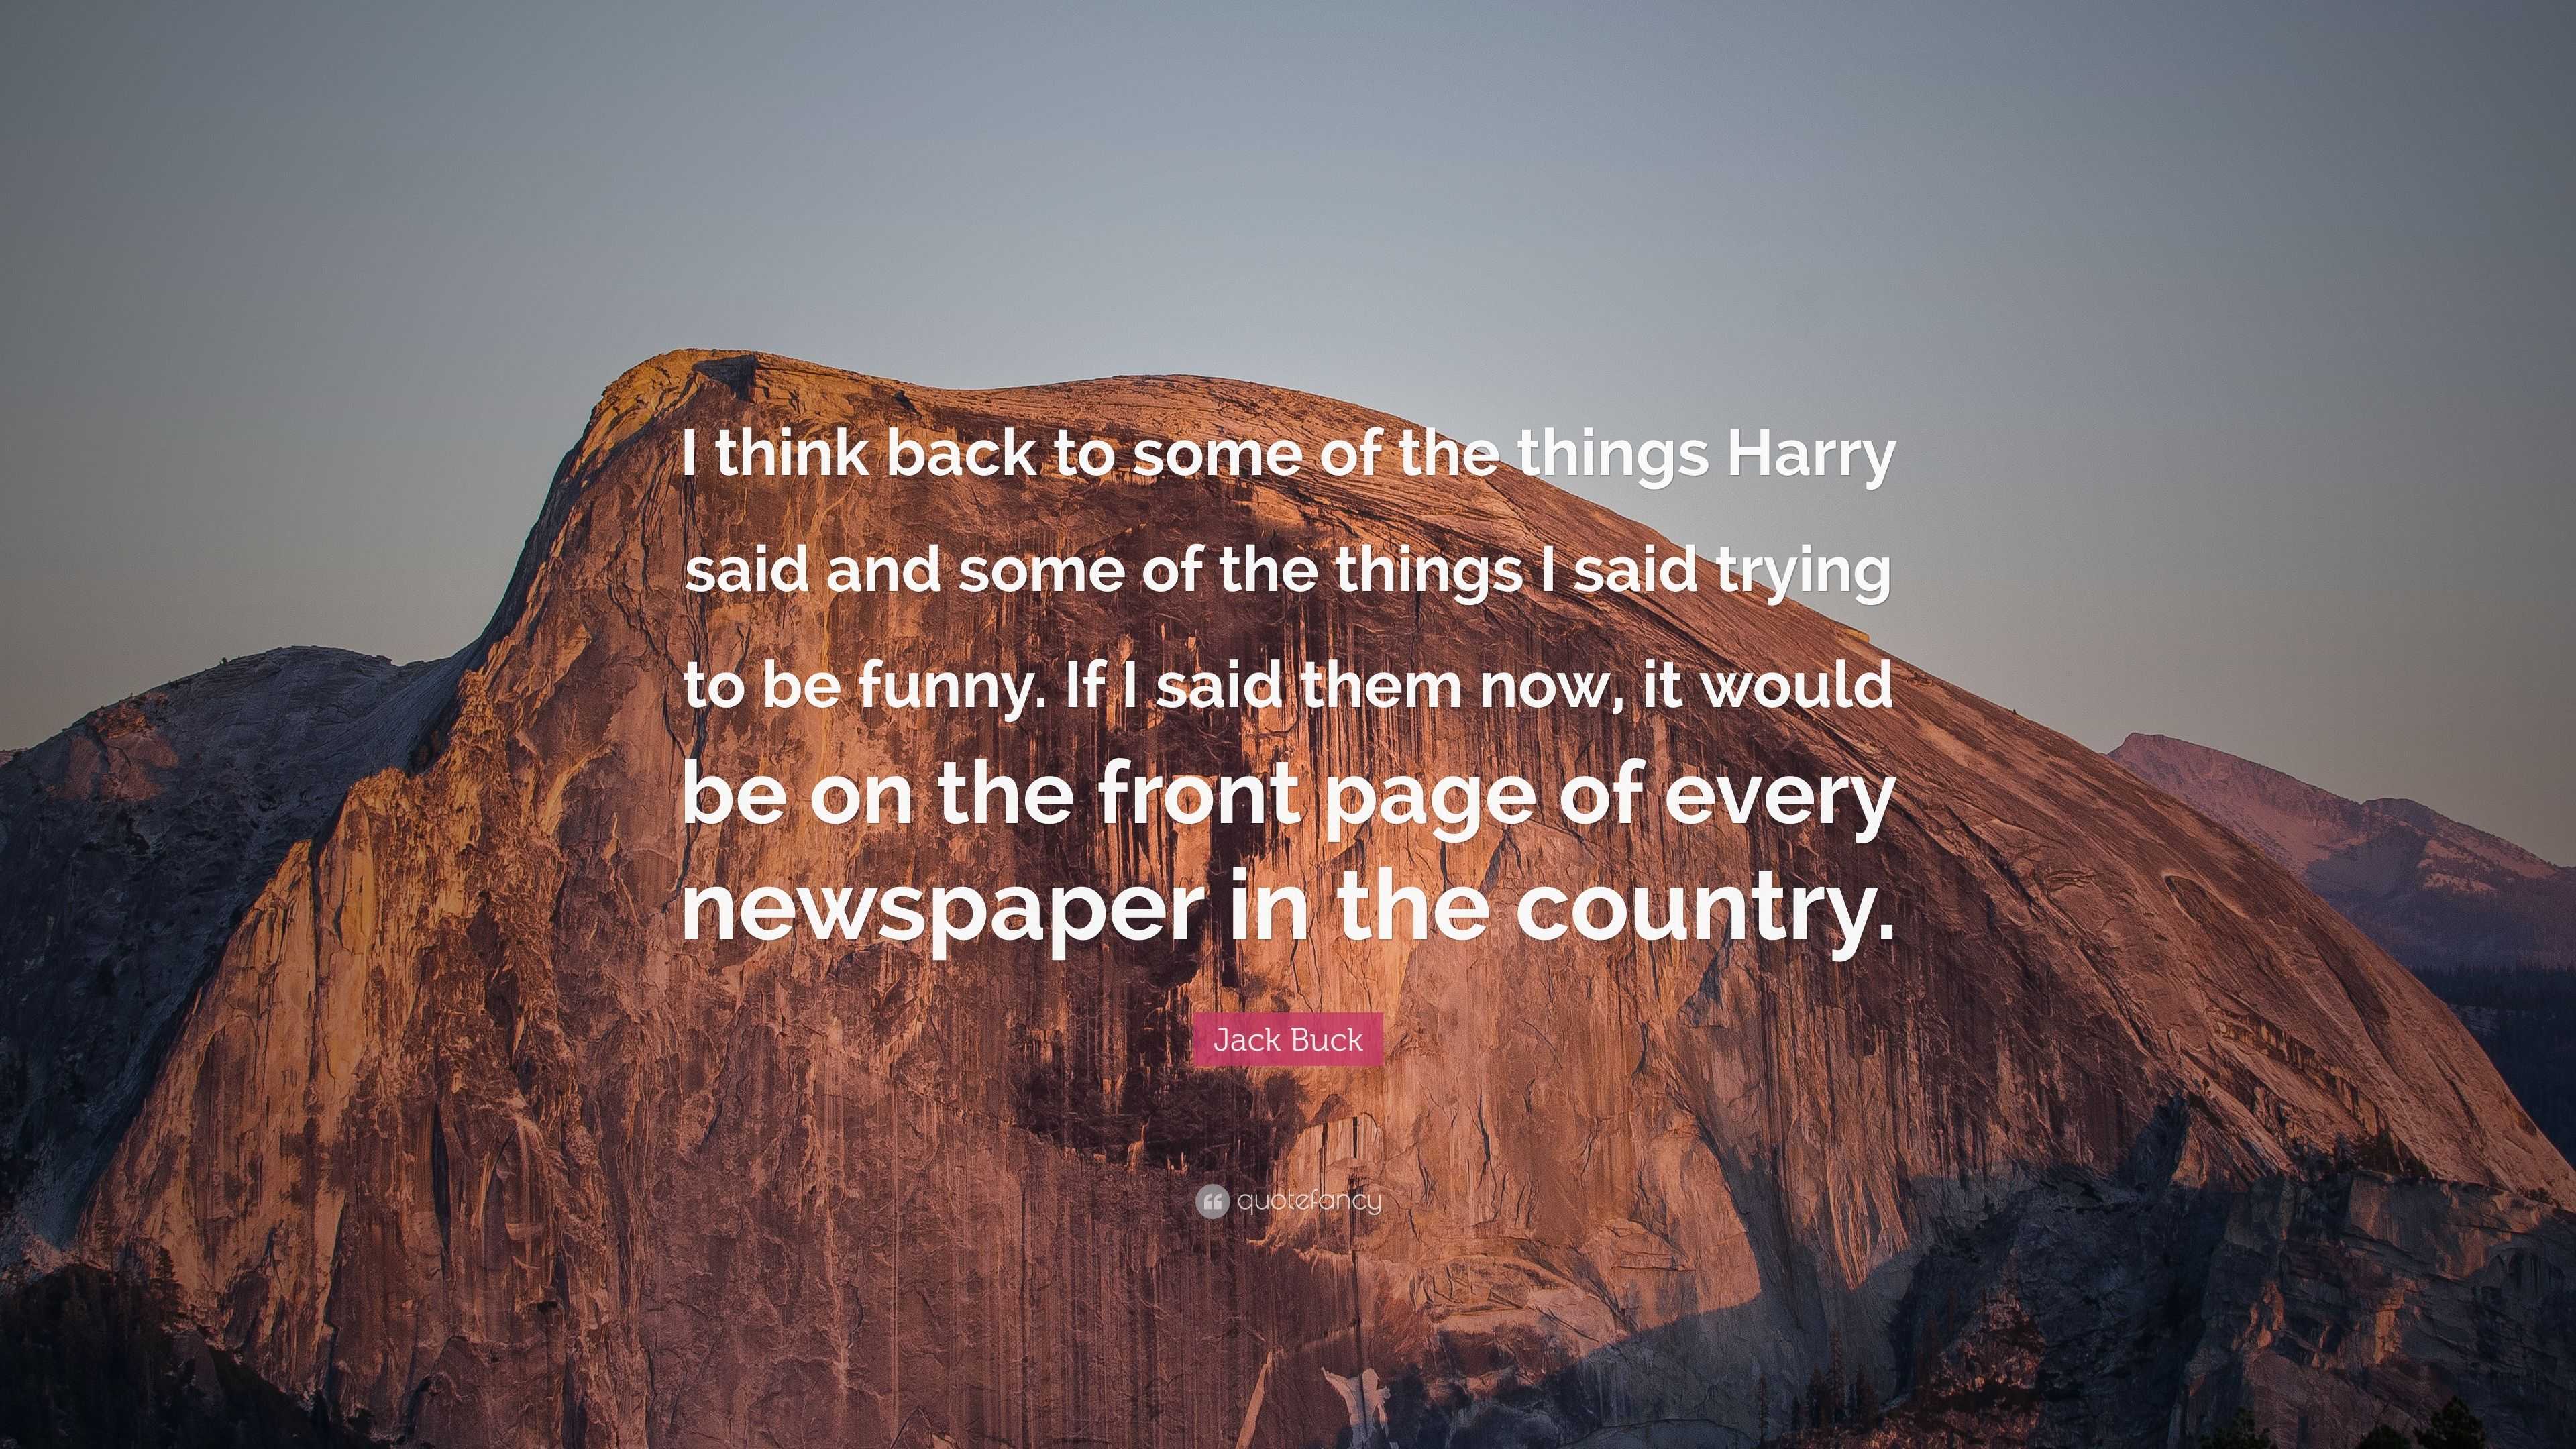 Jack Buck Quote: “I think back to some of the things Harry said and some of  the things I said trying to be funny. If I said them now, it w...”